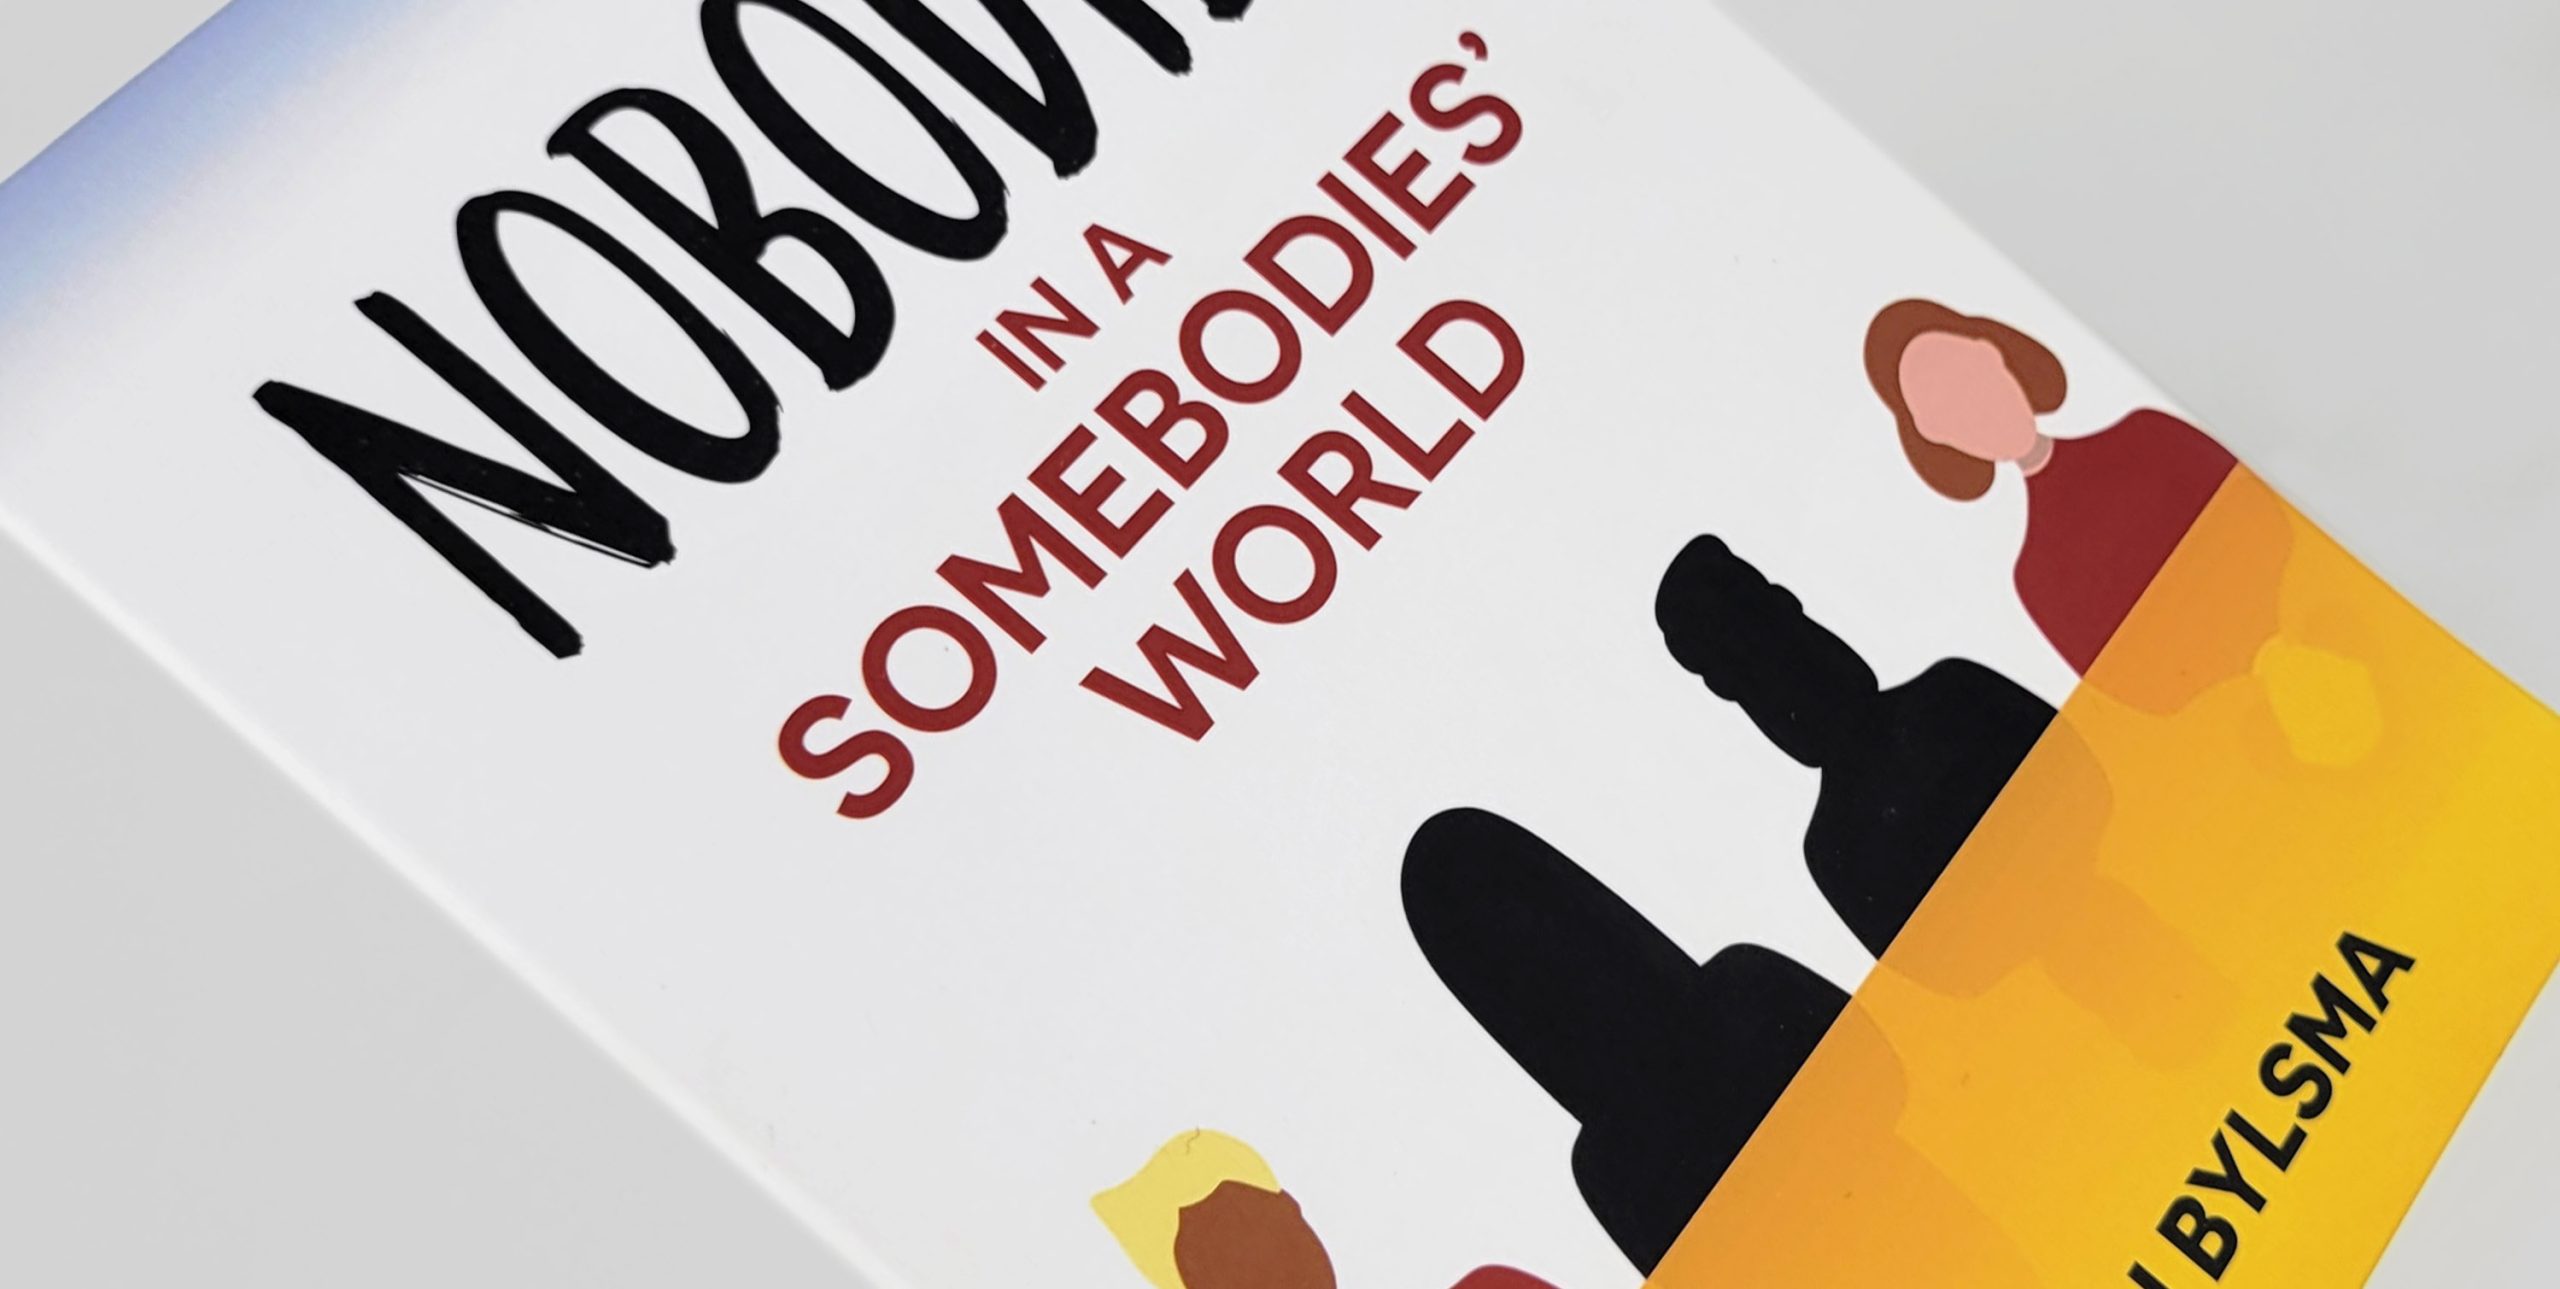 Nobodies In A Somebodies World book cover